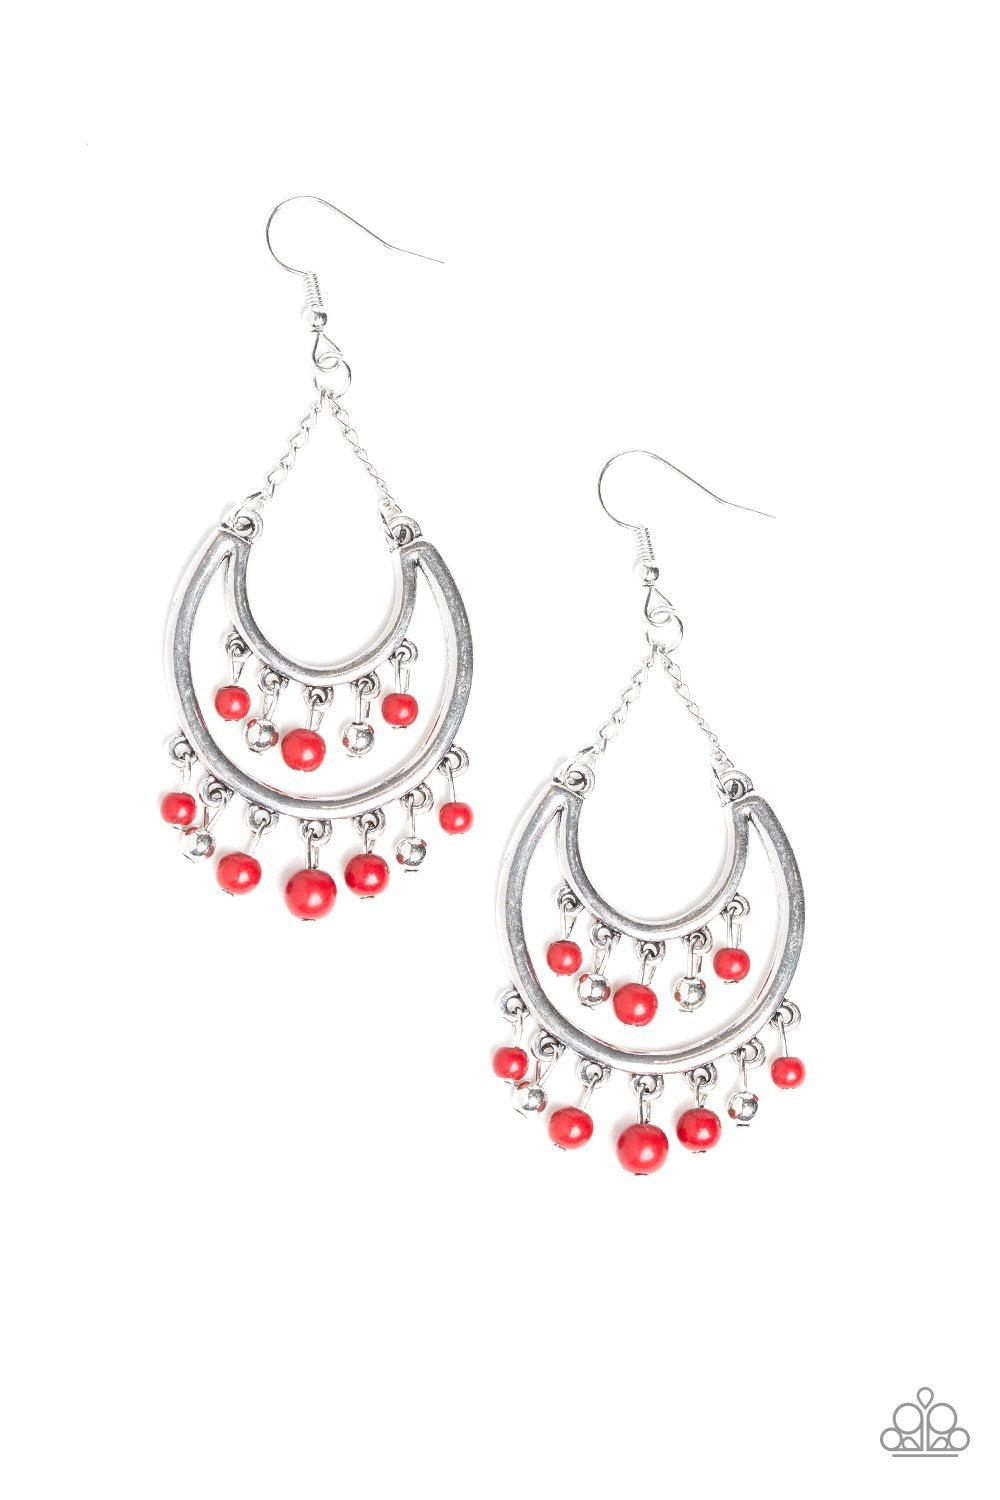 Free-Spirited Spirit Red and Silver Earrings - Paparazzi Accessories - lightbox -CarasShop.com - $5 Jewelry by Cara Jewels